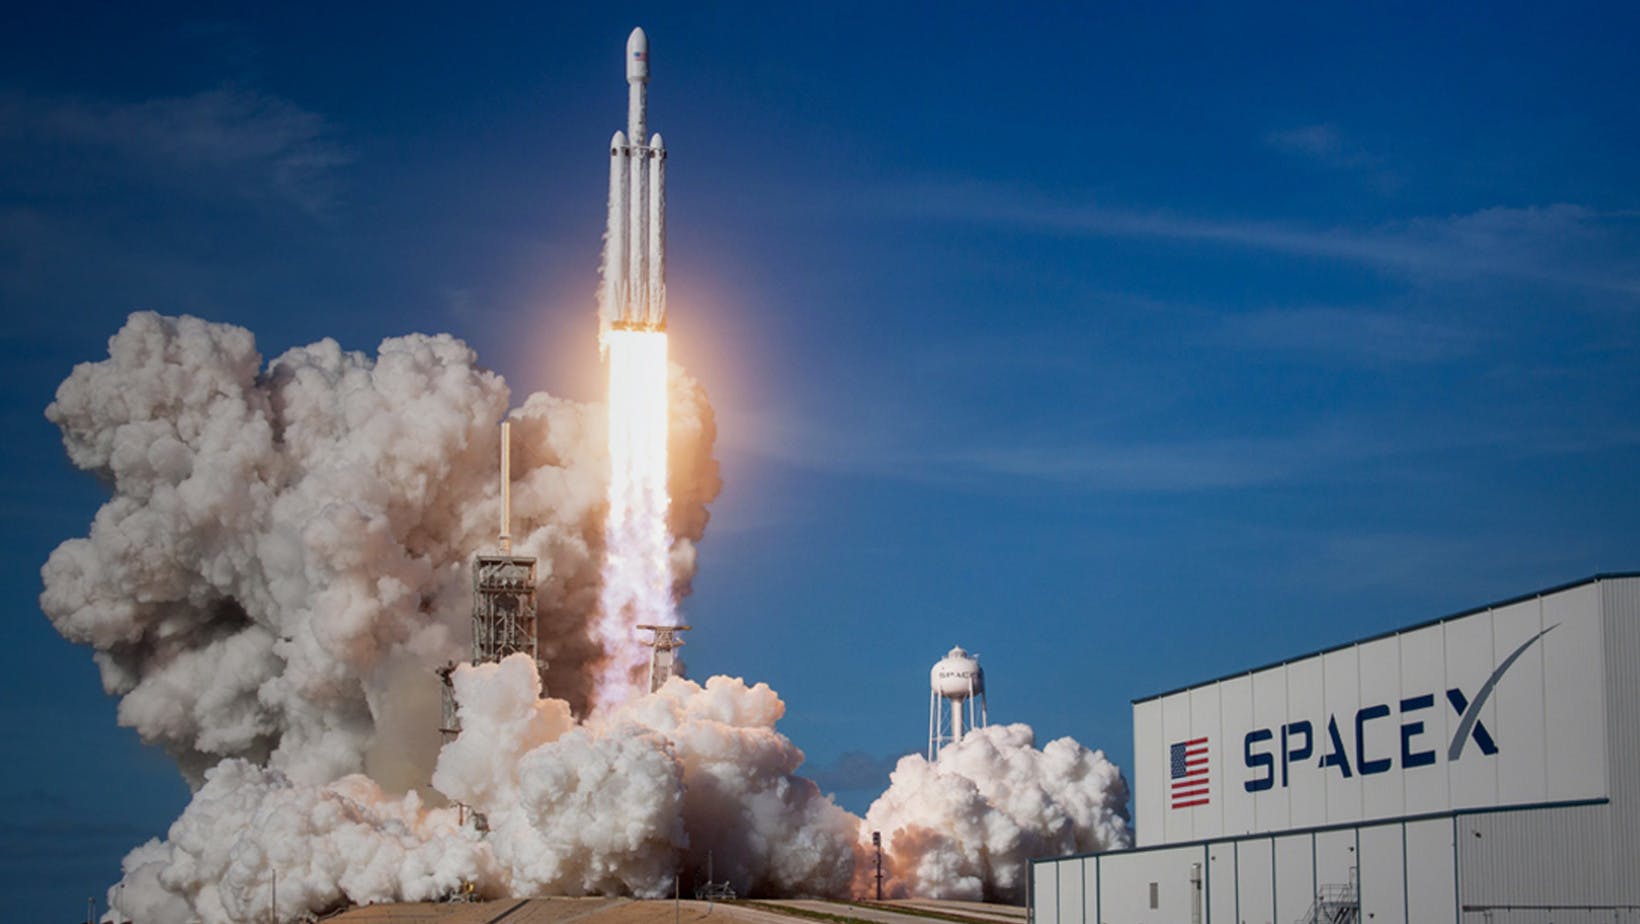 SpaceX rocket taking off. Engineers and data scientists at SpaceX rely on statistics